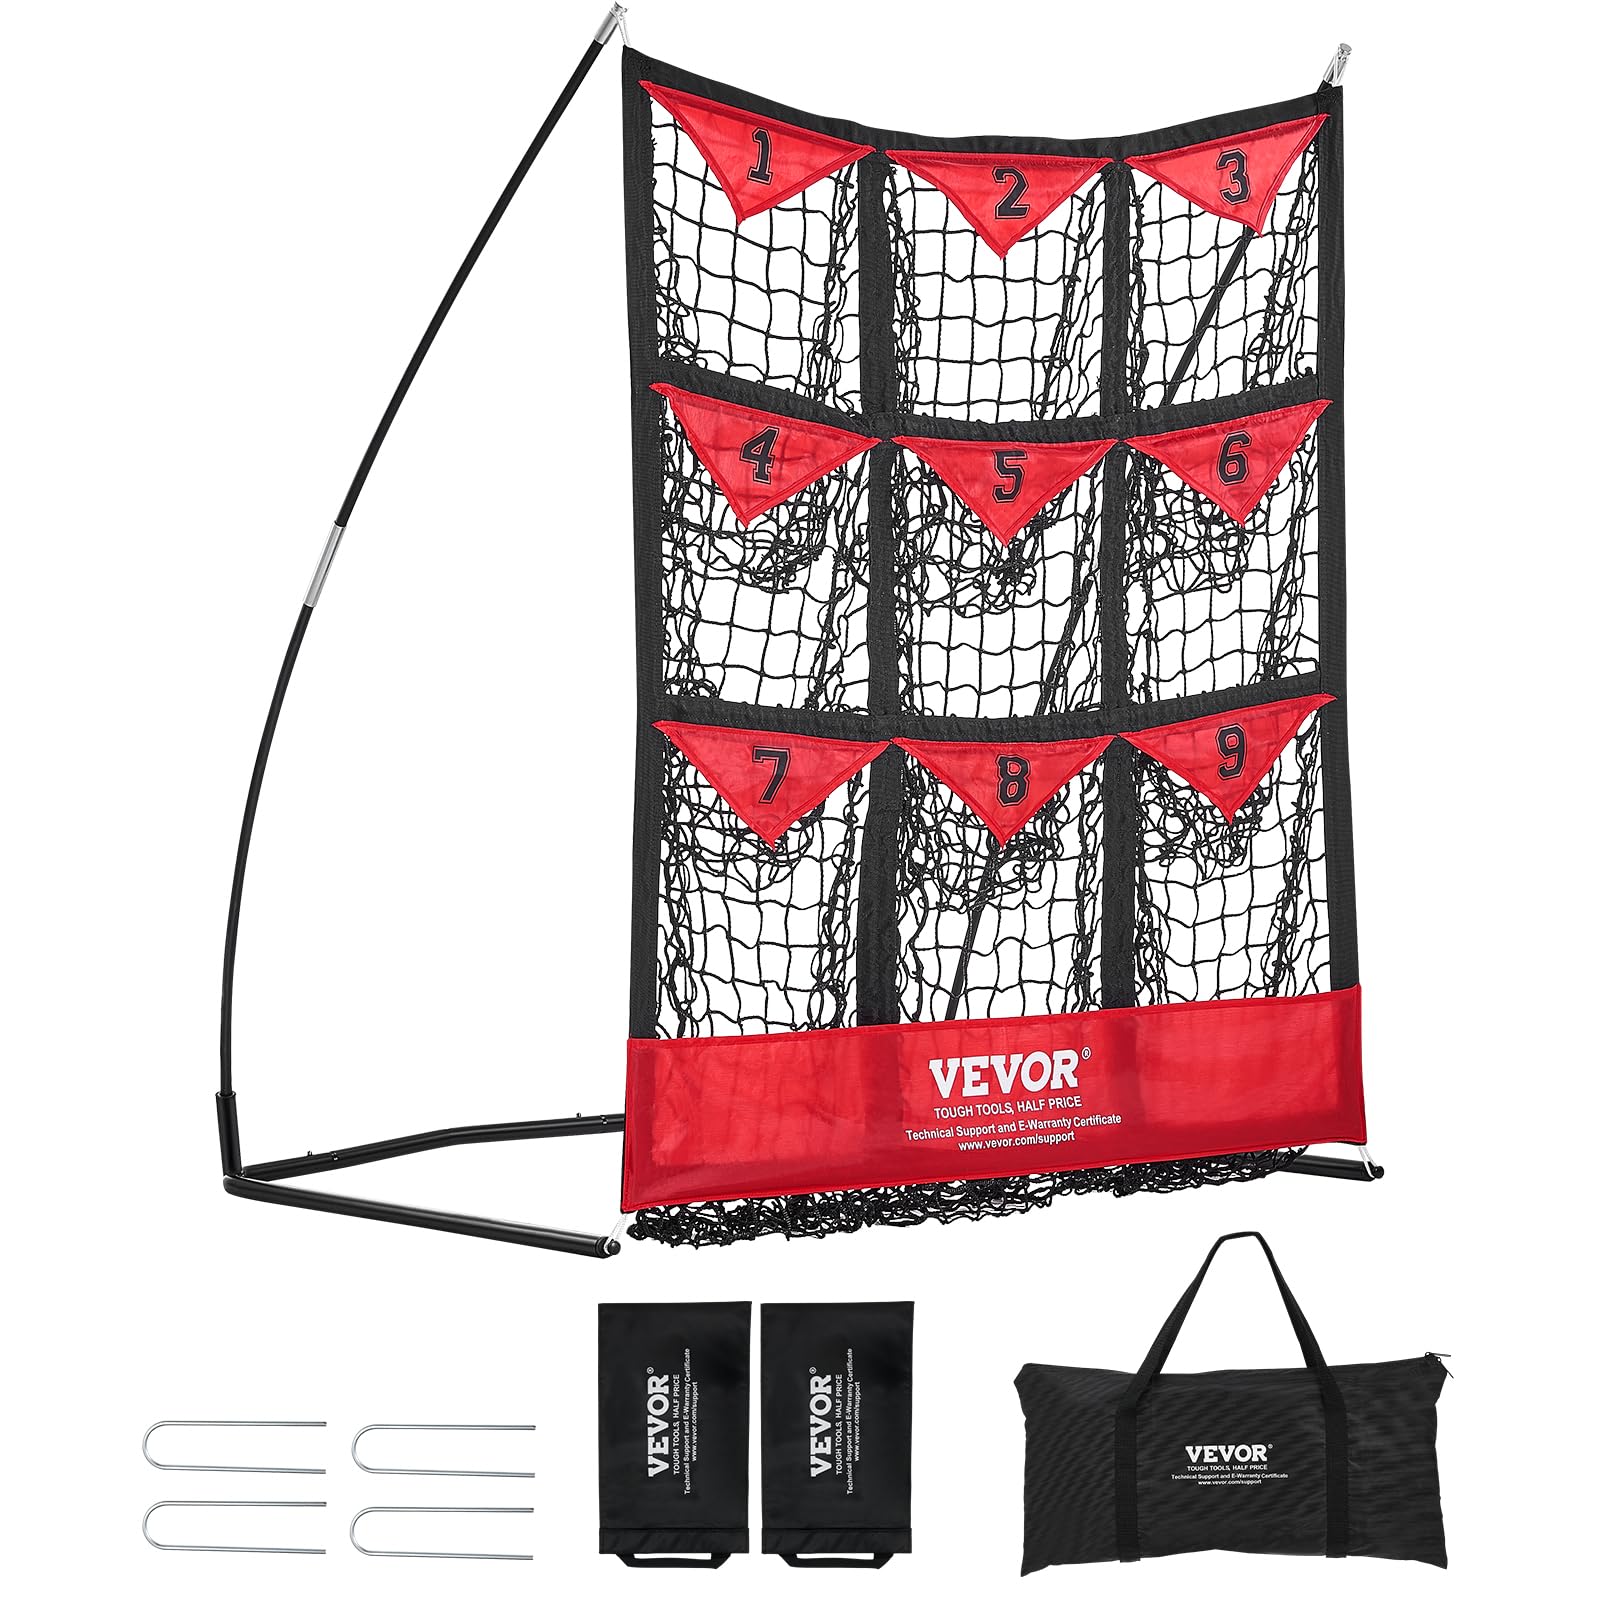 VEVOR 9 Hole Baseball Pitching Net,Softball Baseball Training Equipment for Hitting Pitching Practice, Portable Quick Assembly Trainer Aid with Carry Bag, Strike Zone, Ground Stakes, for Youth Adults